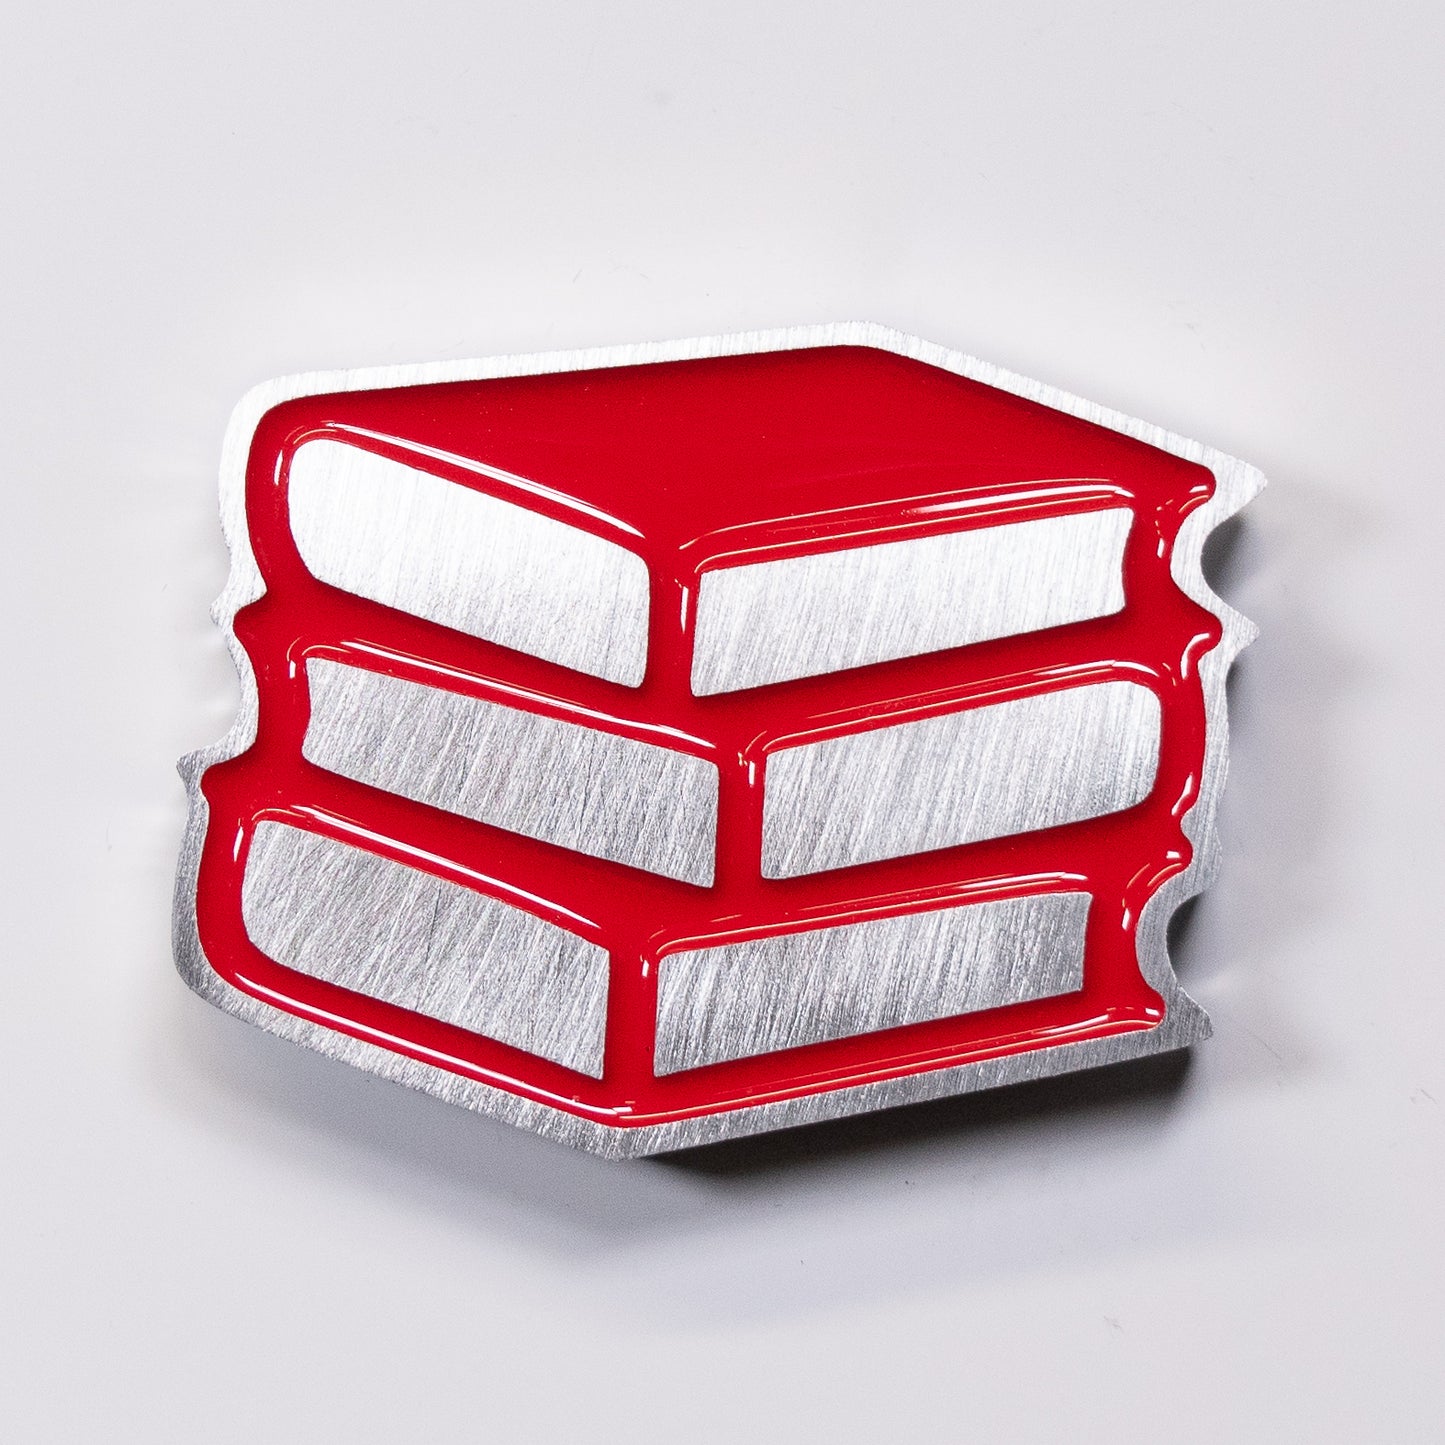 Book Stack Magnet Red